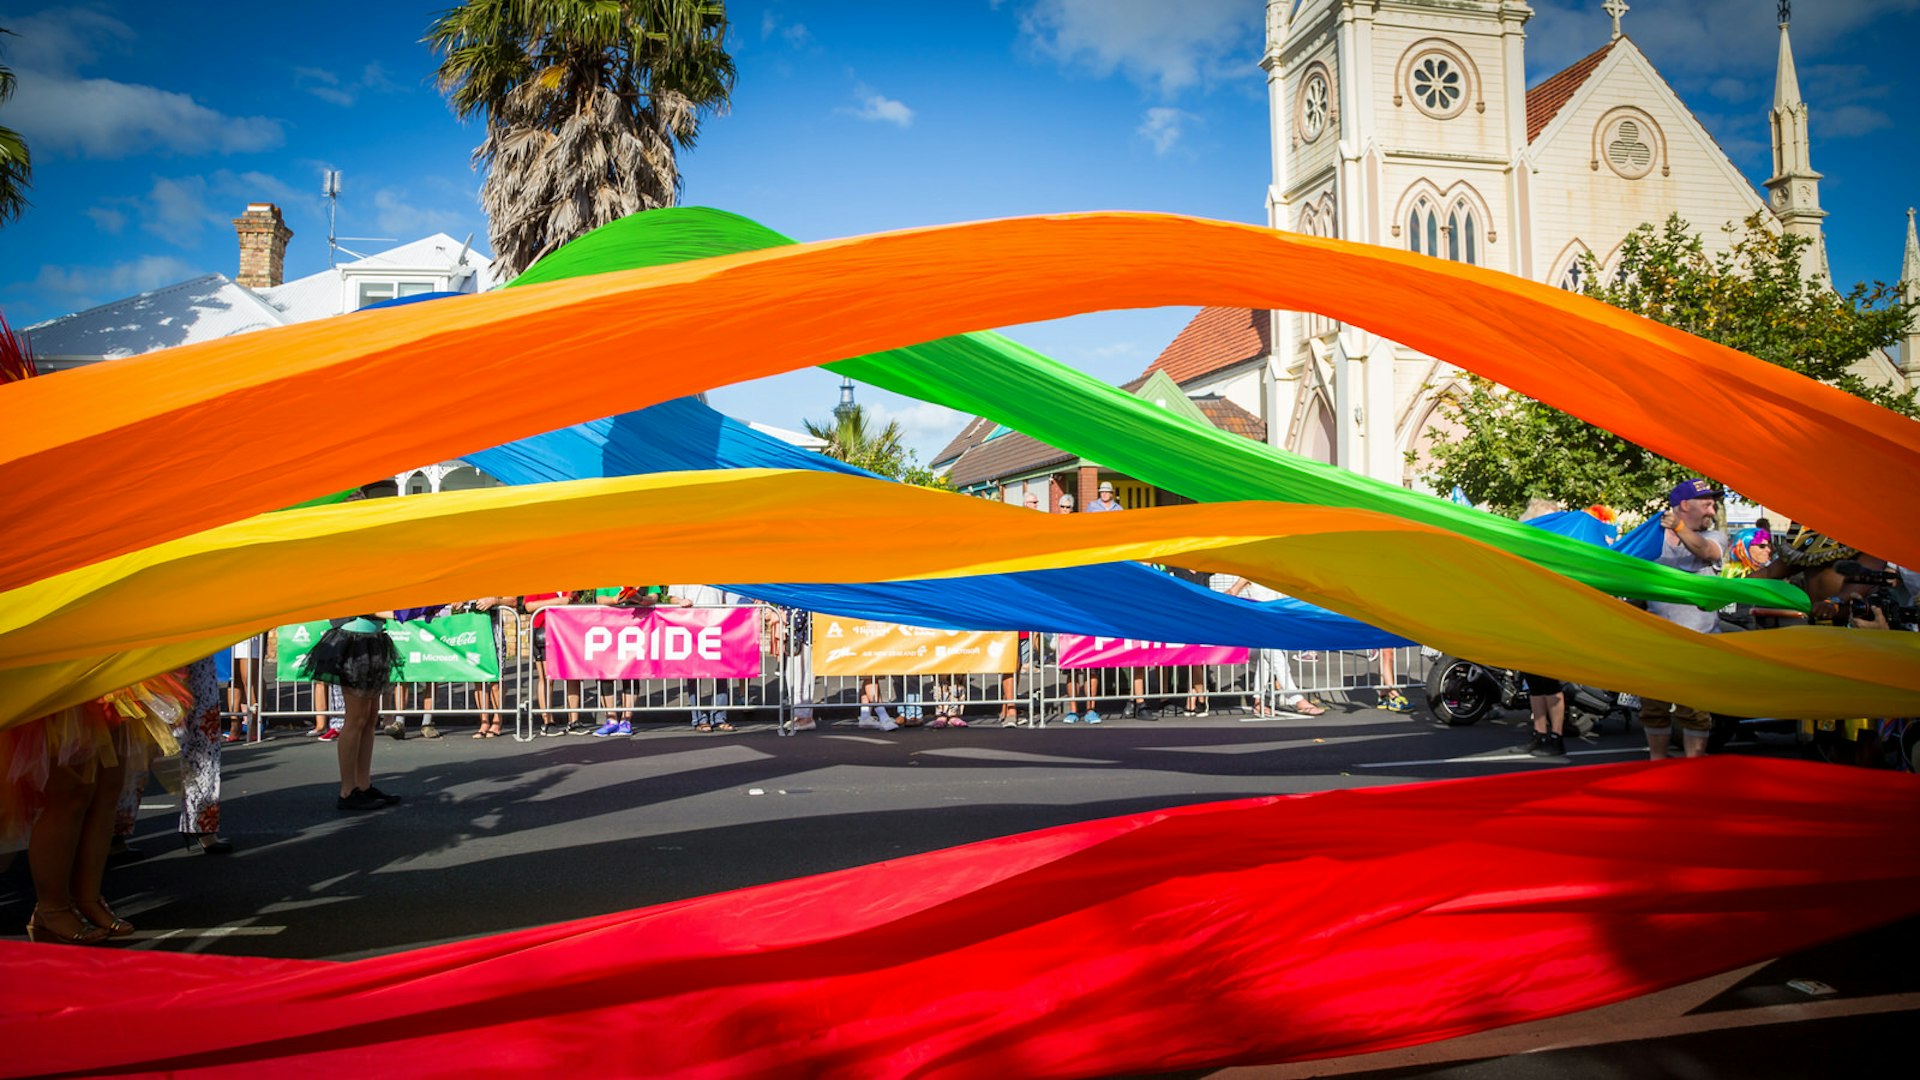 Banners of material in every colour of the rainbow are being waved across a street; in the background are a crowd of onlookers standing in front of a church.